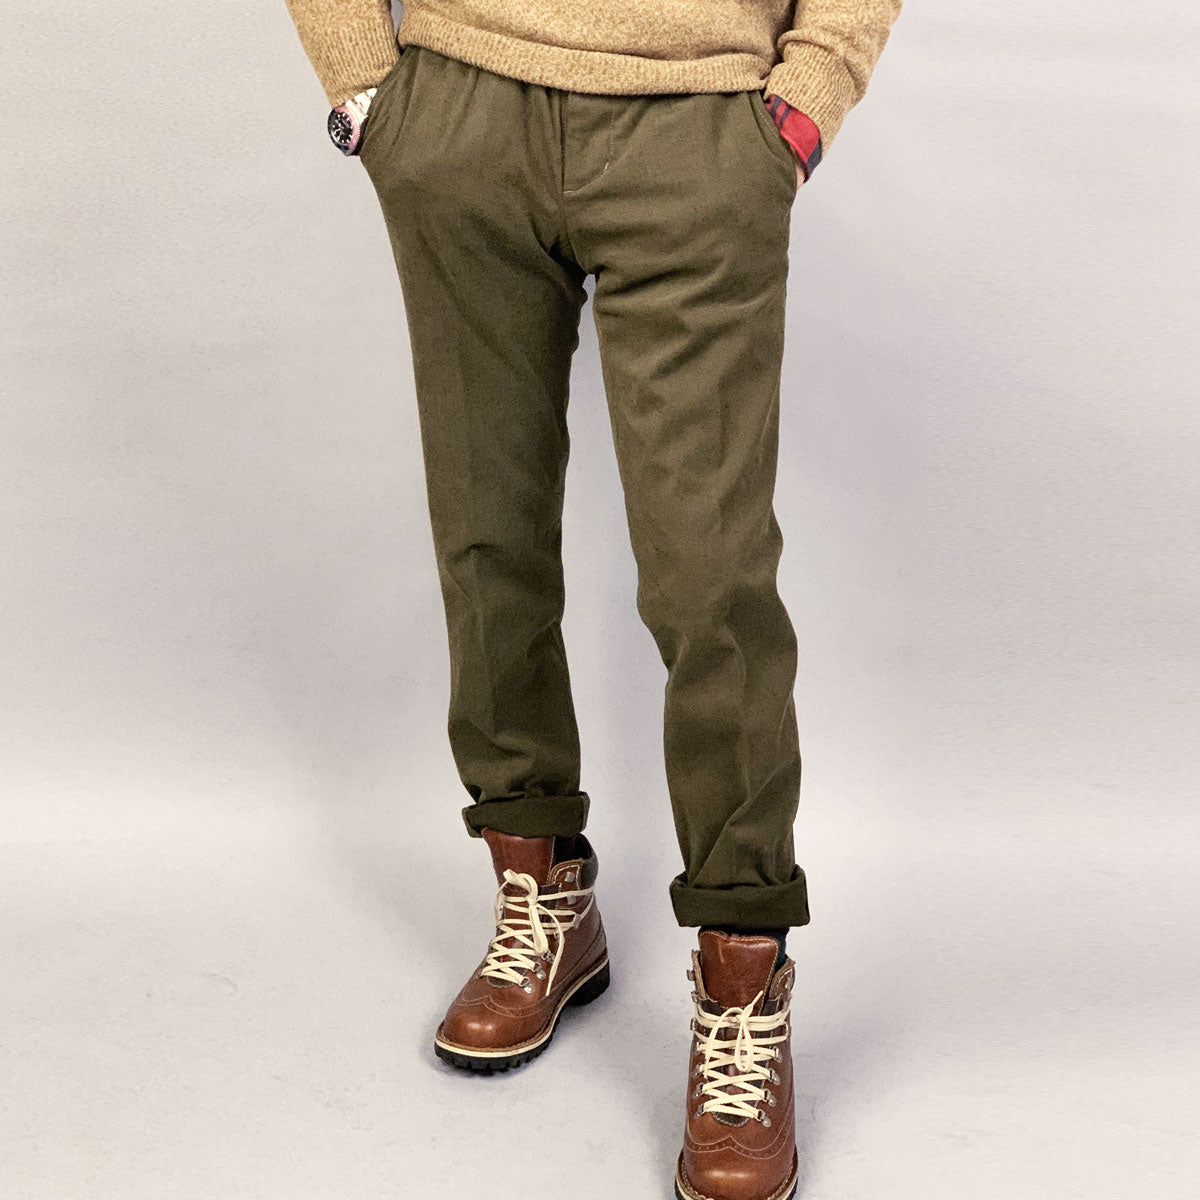 Cotton Chino Pants for Man